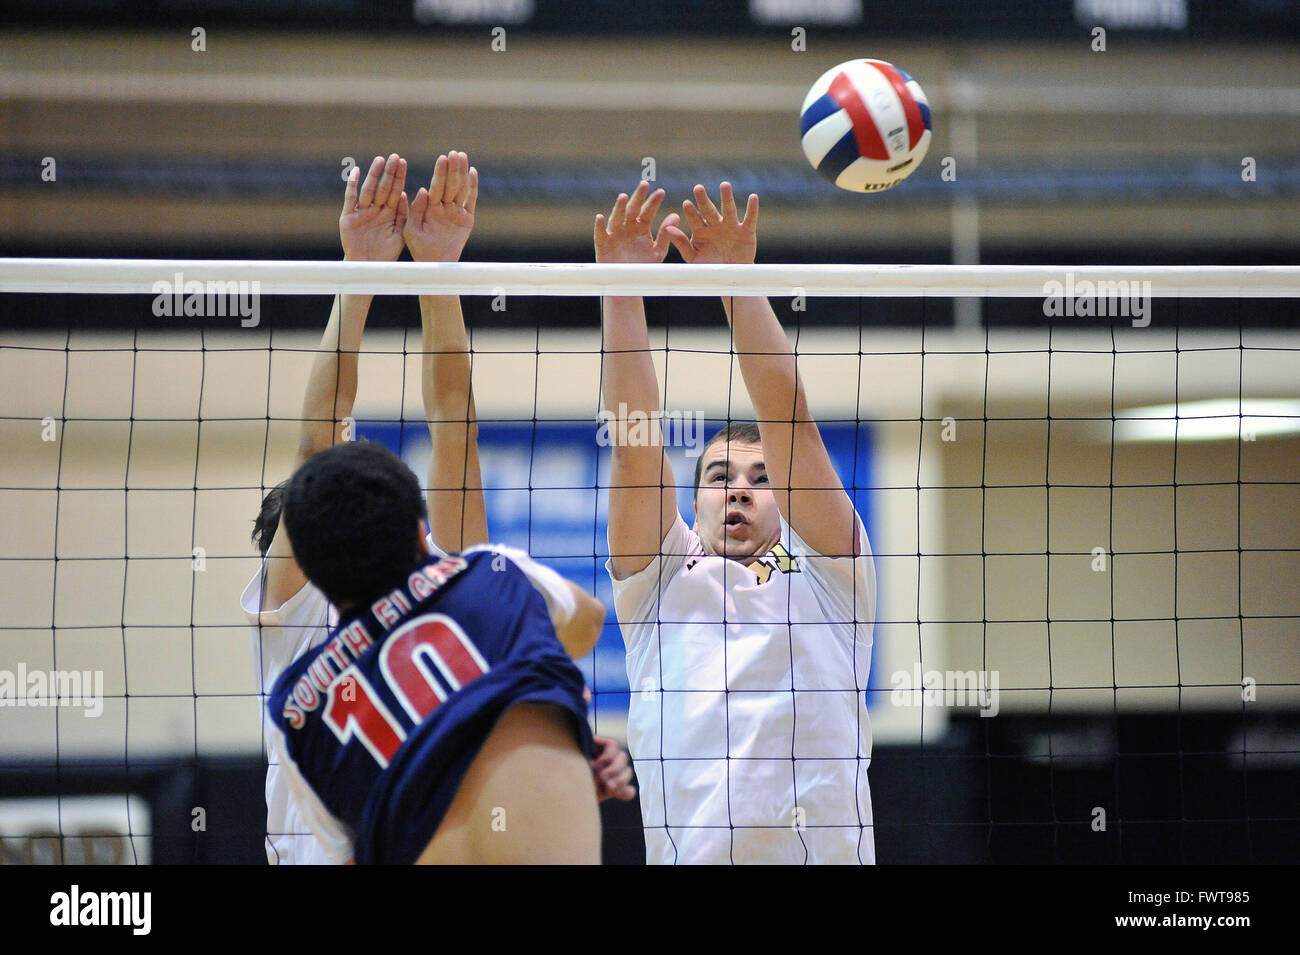 Players rise in an attempt to block a kill shot during a high school volleyball match. USA. Stock Photo